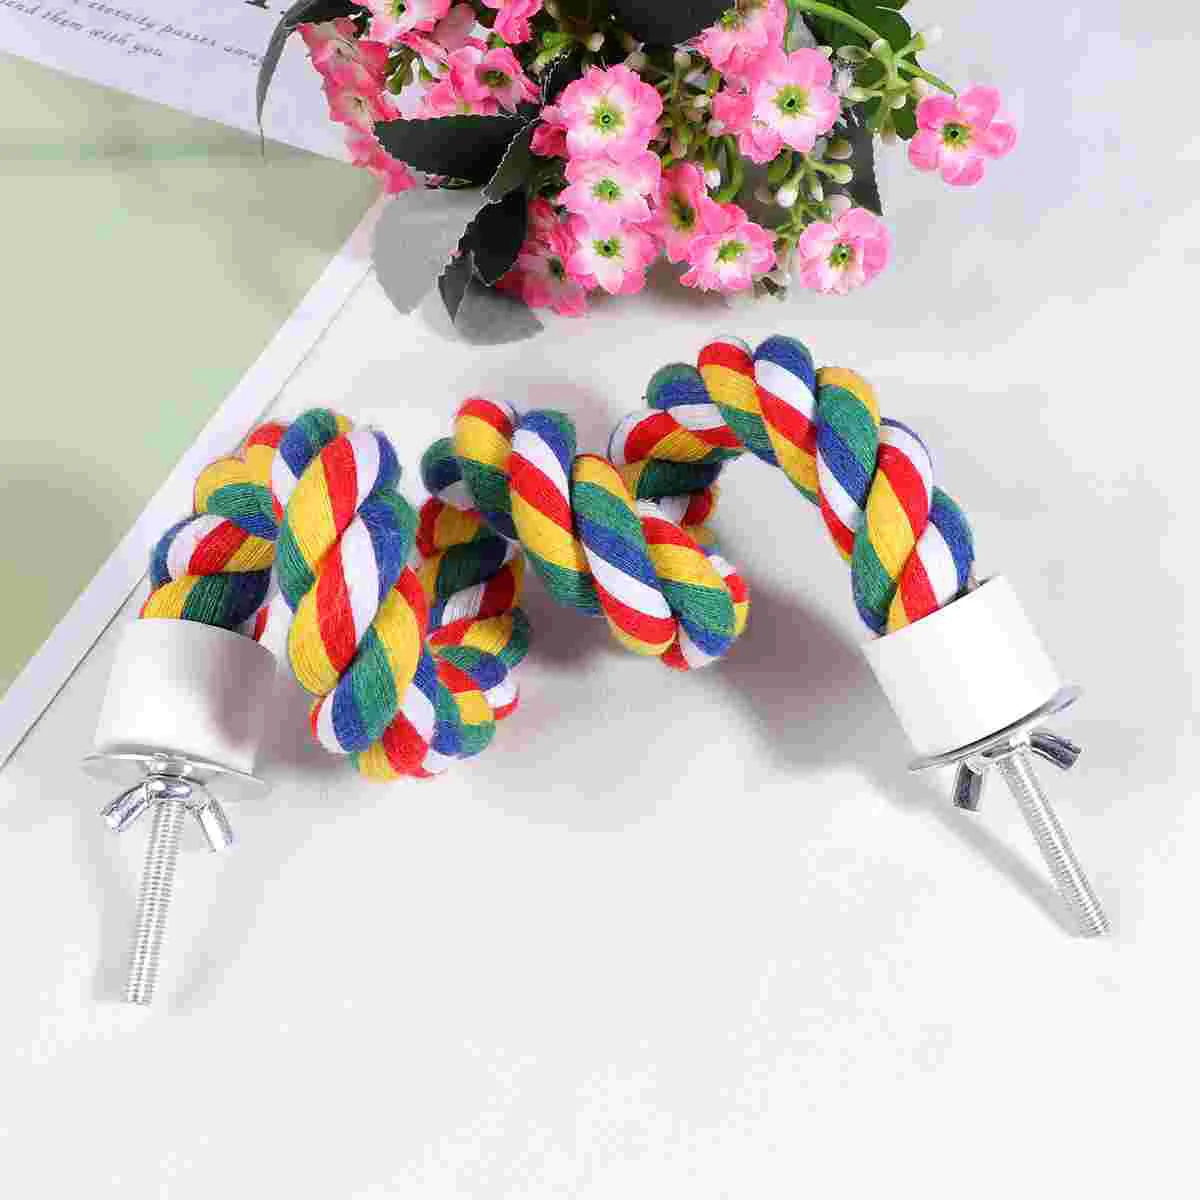 

Parrot Cotton Rope, 1PC Parrot Climbing Rope Rope Perch Parrot Chewing Cotton Rope Perch|40x3x3cm/. 6x1. 17 inches